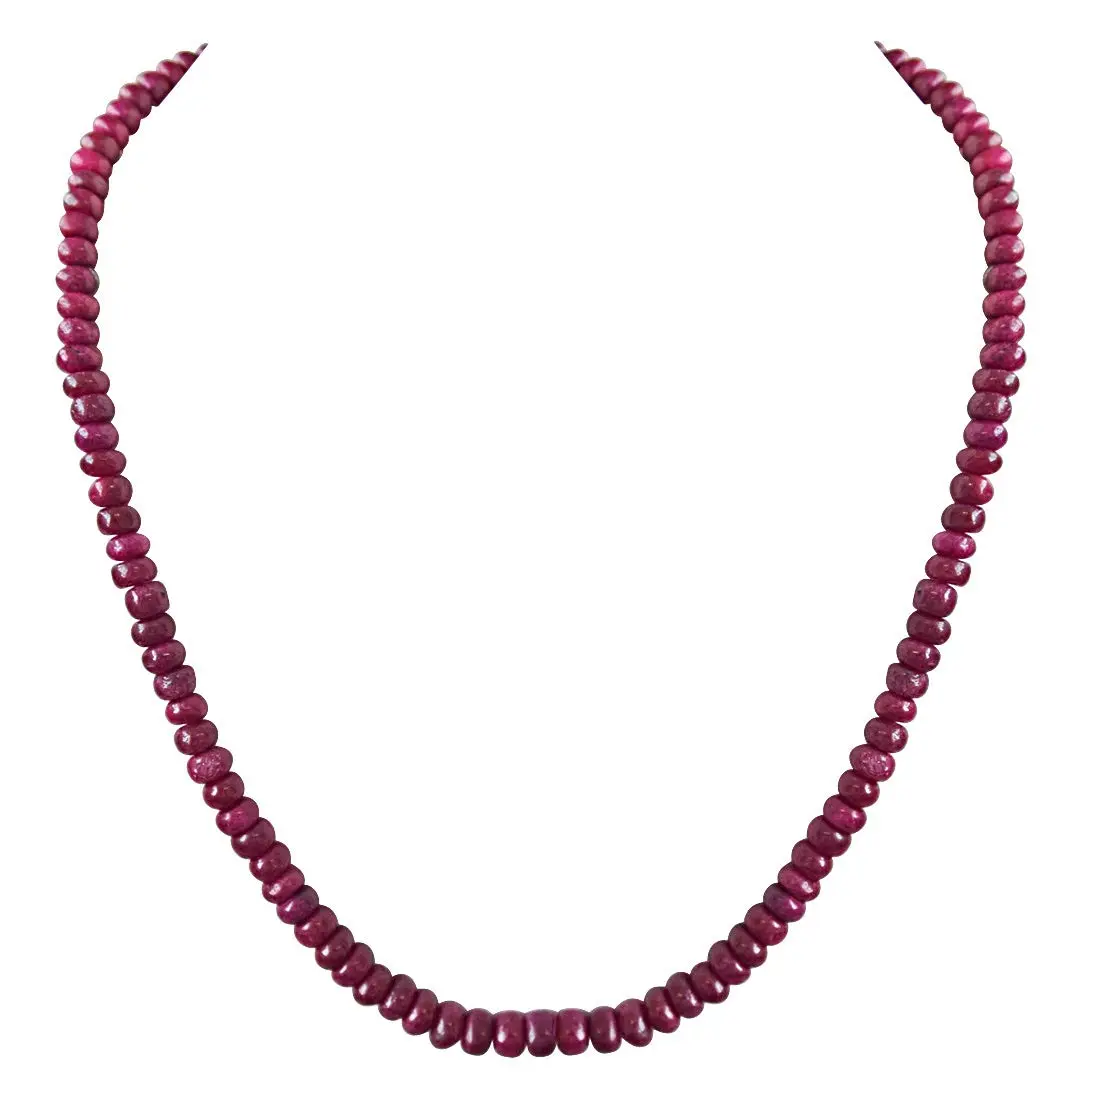 252cts Single Line Real Maroon Red Ruby Beads Necklace for Women (252ctsRubyNeck)